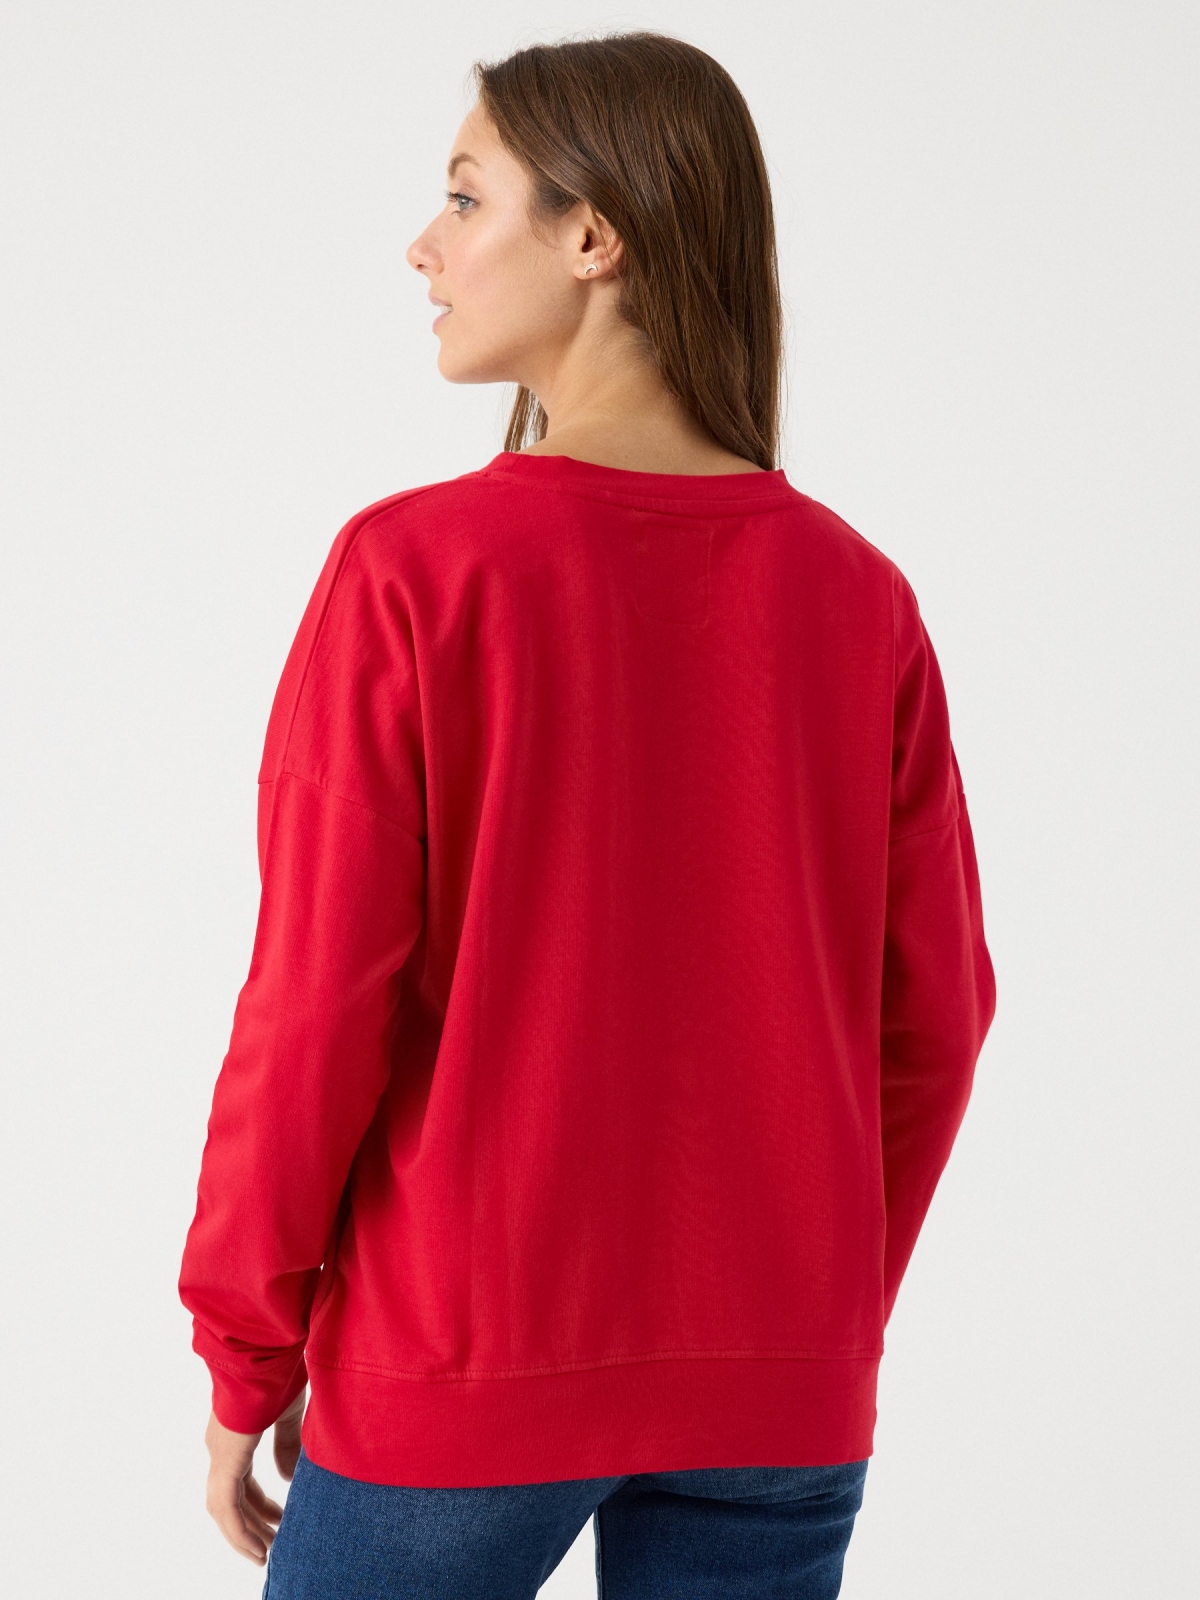 Basic round neck sweatshirt red middle back view